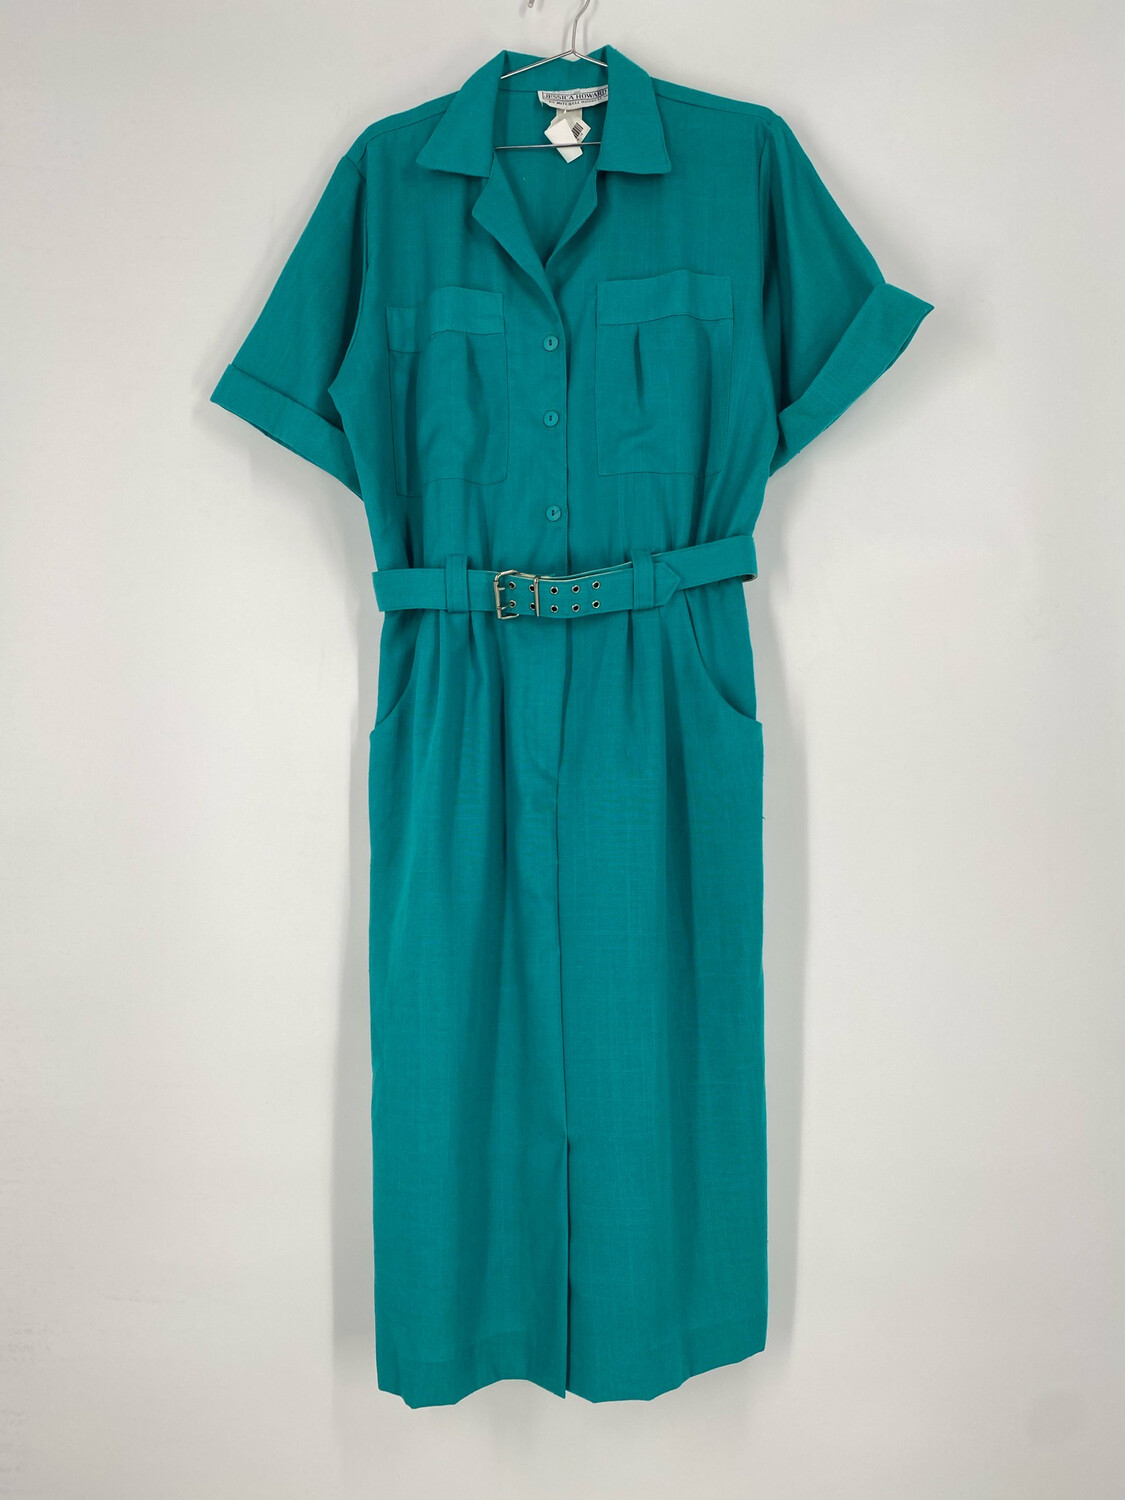 Jessica Howard By Mitchell Rodbell Teal Button Up Dress Size 14